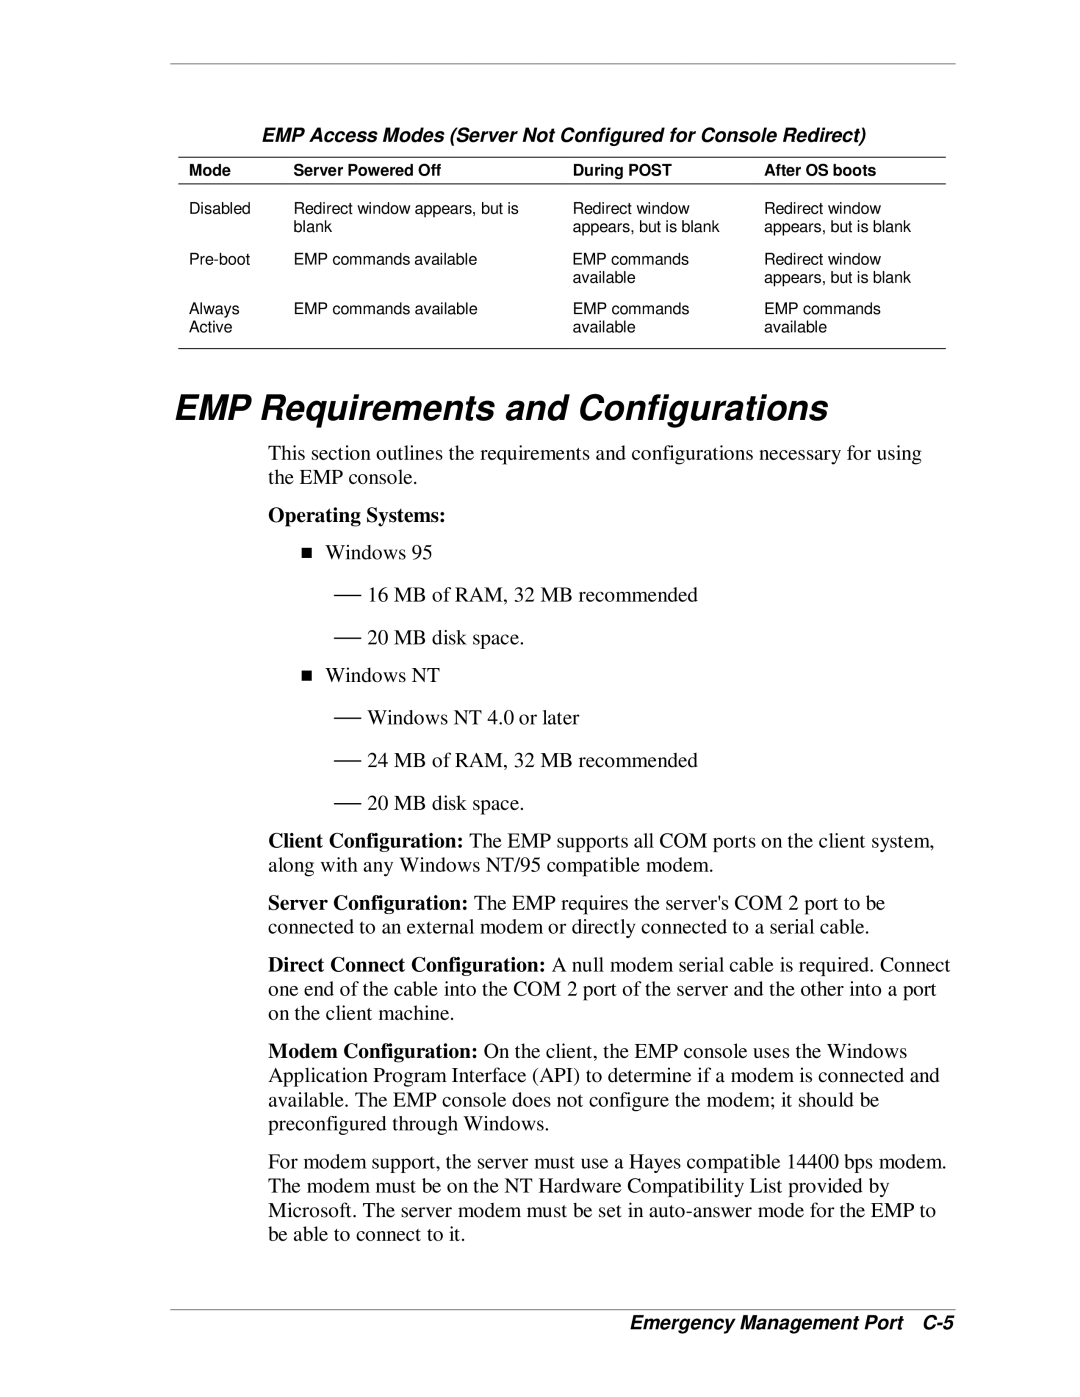 NEC MH4500 manual EMP Requirements and Configurations, Operating Systems 